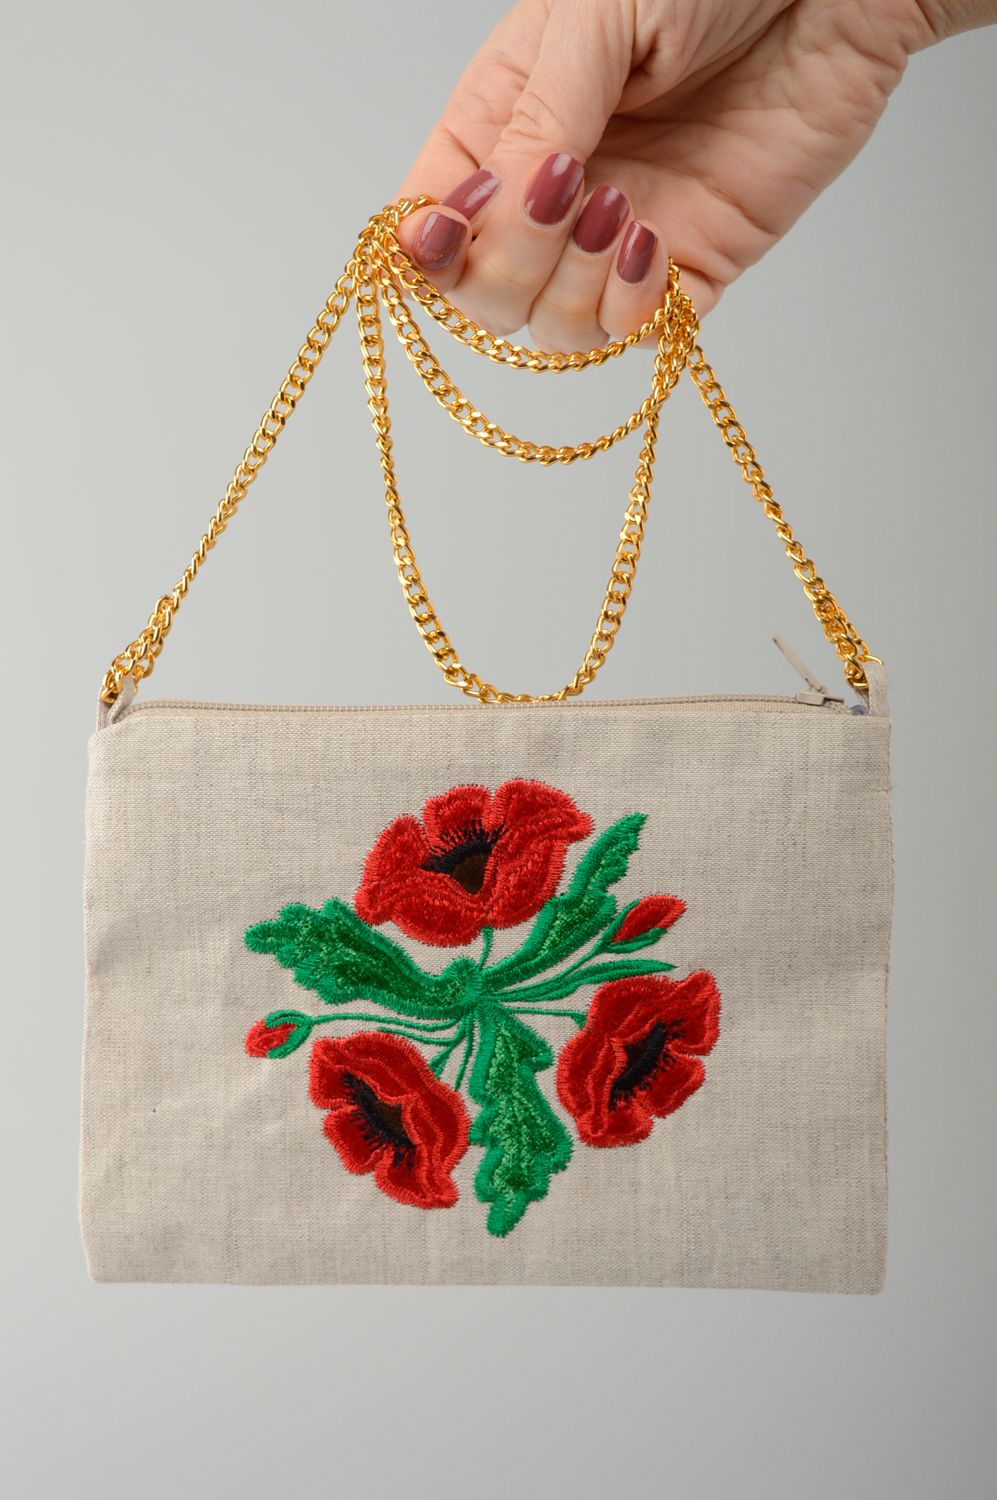 Handmade linen clutch bag with embroidery and applique work Poppies photo 2